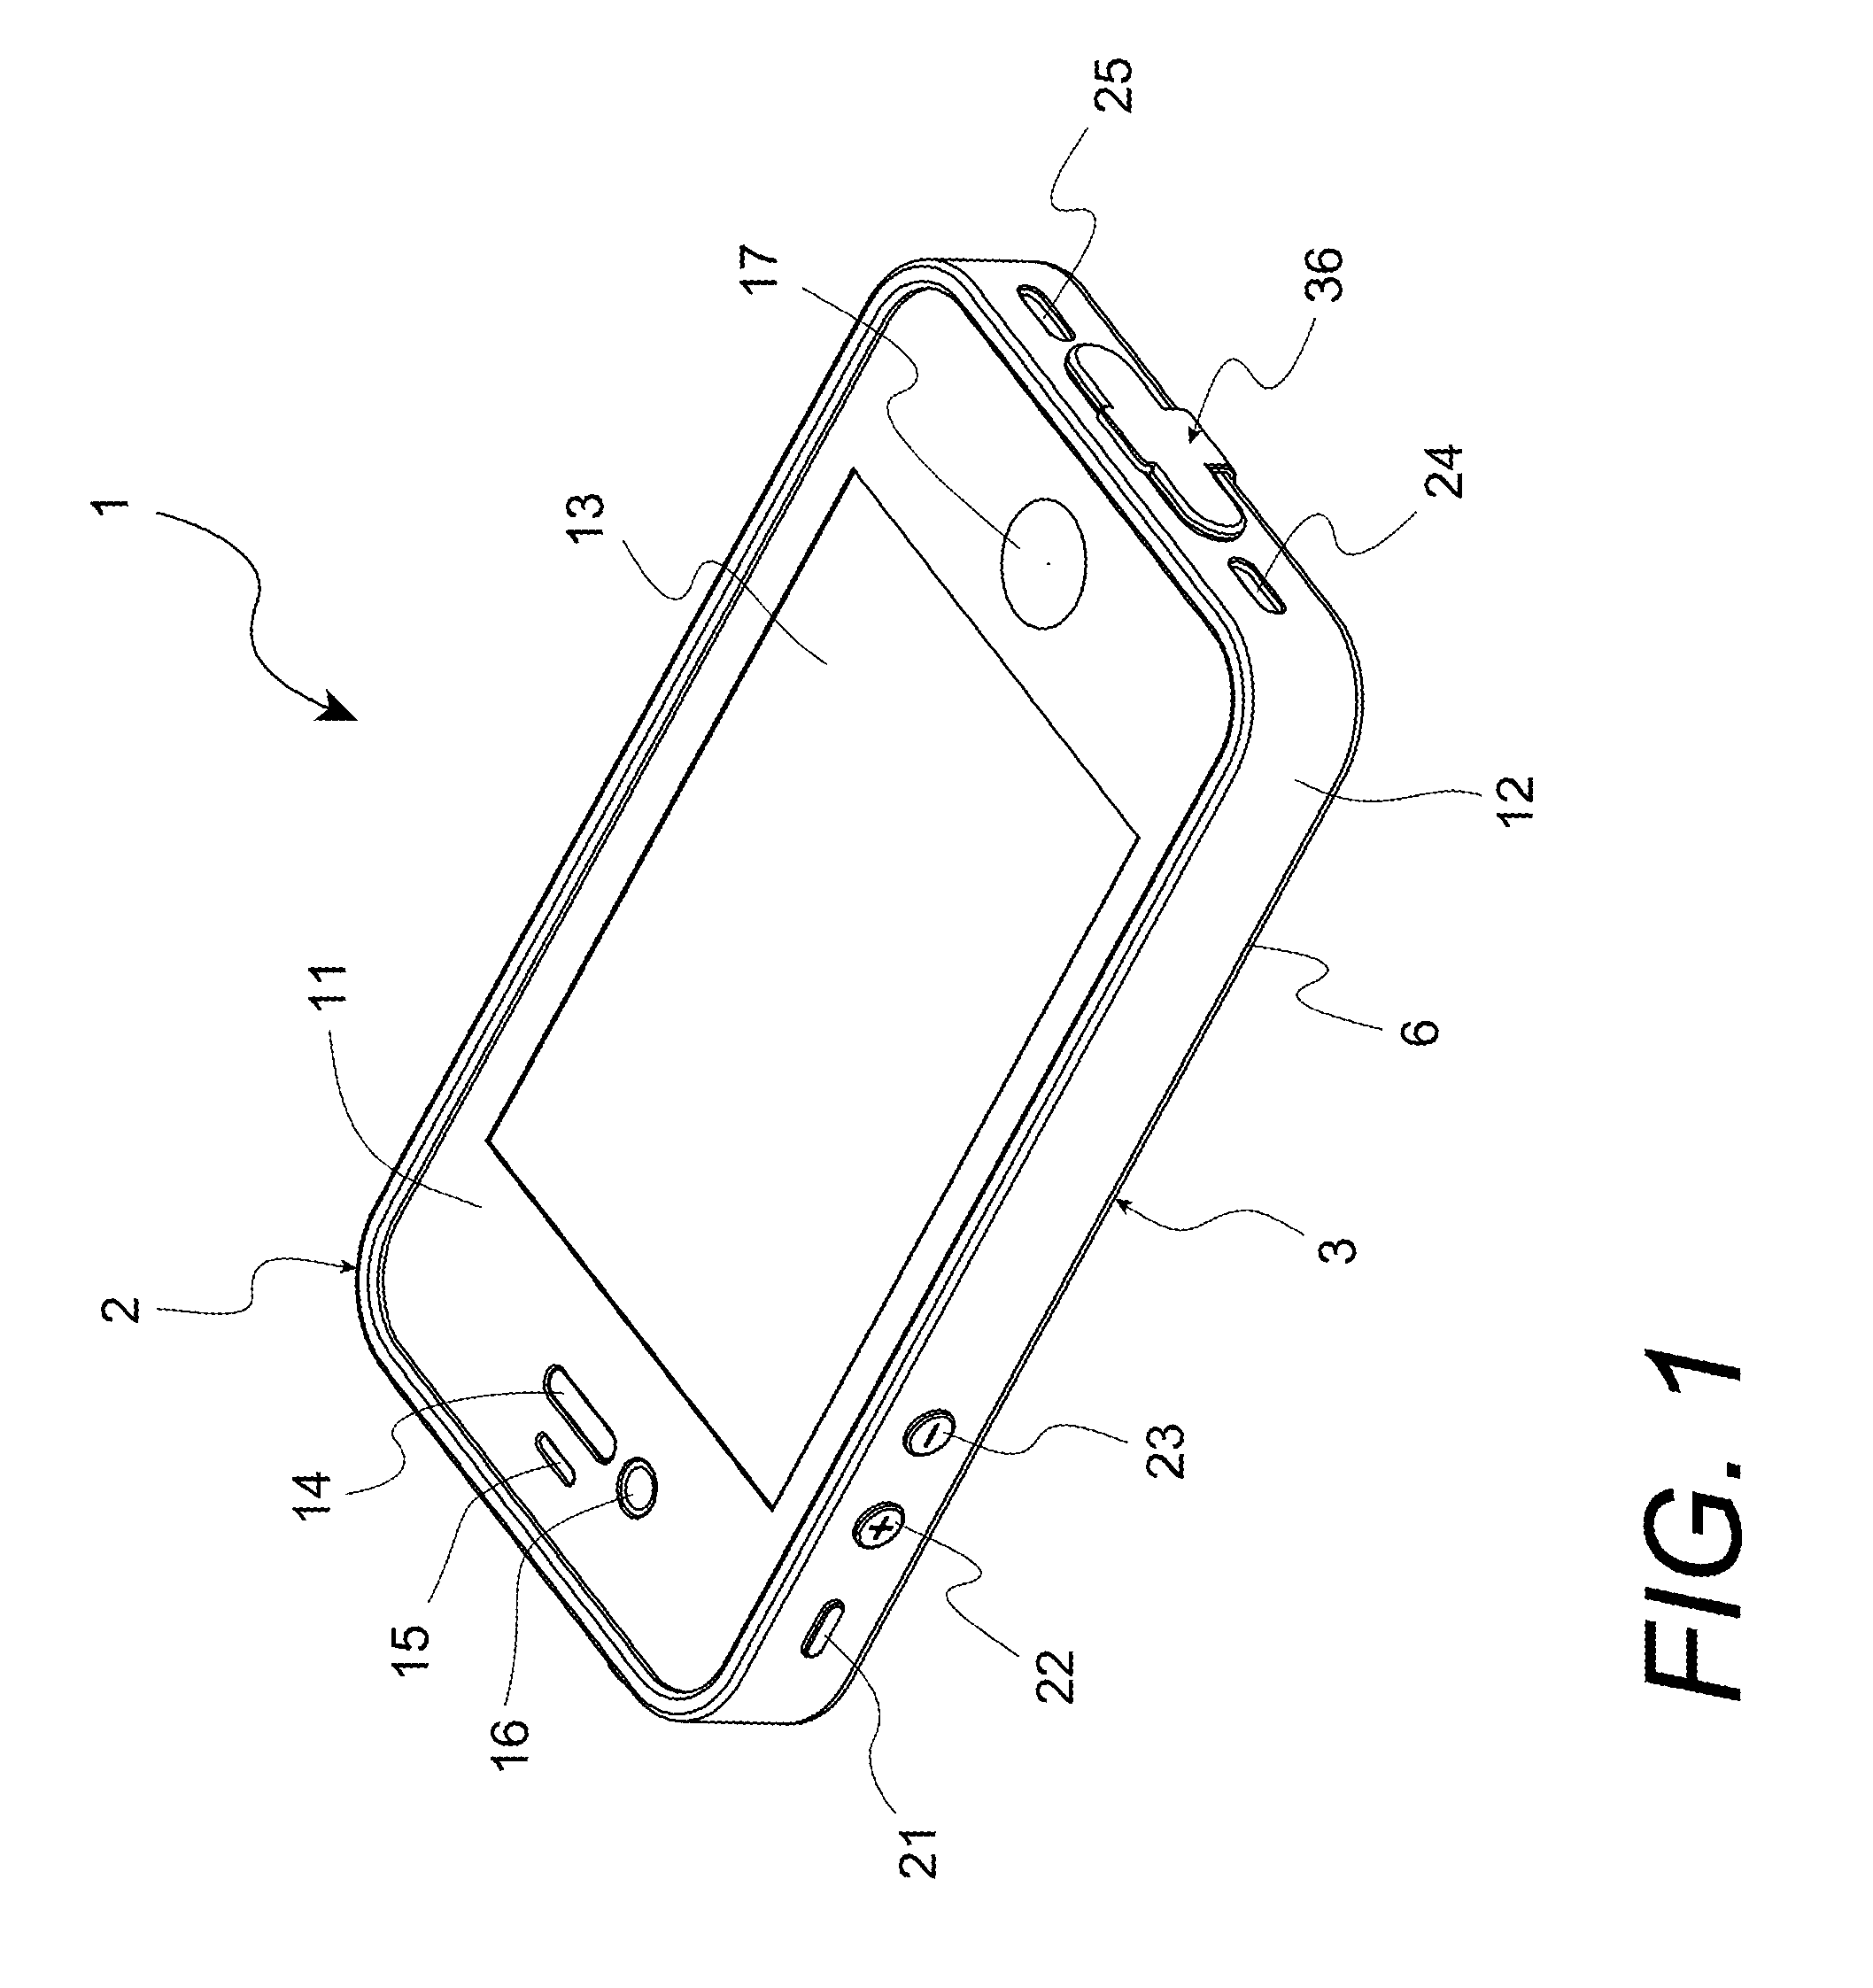 Case for housing and protecting an electronic device